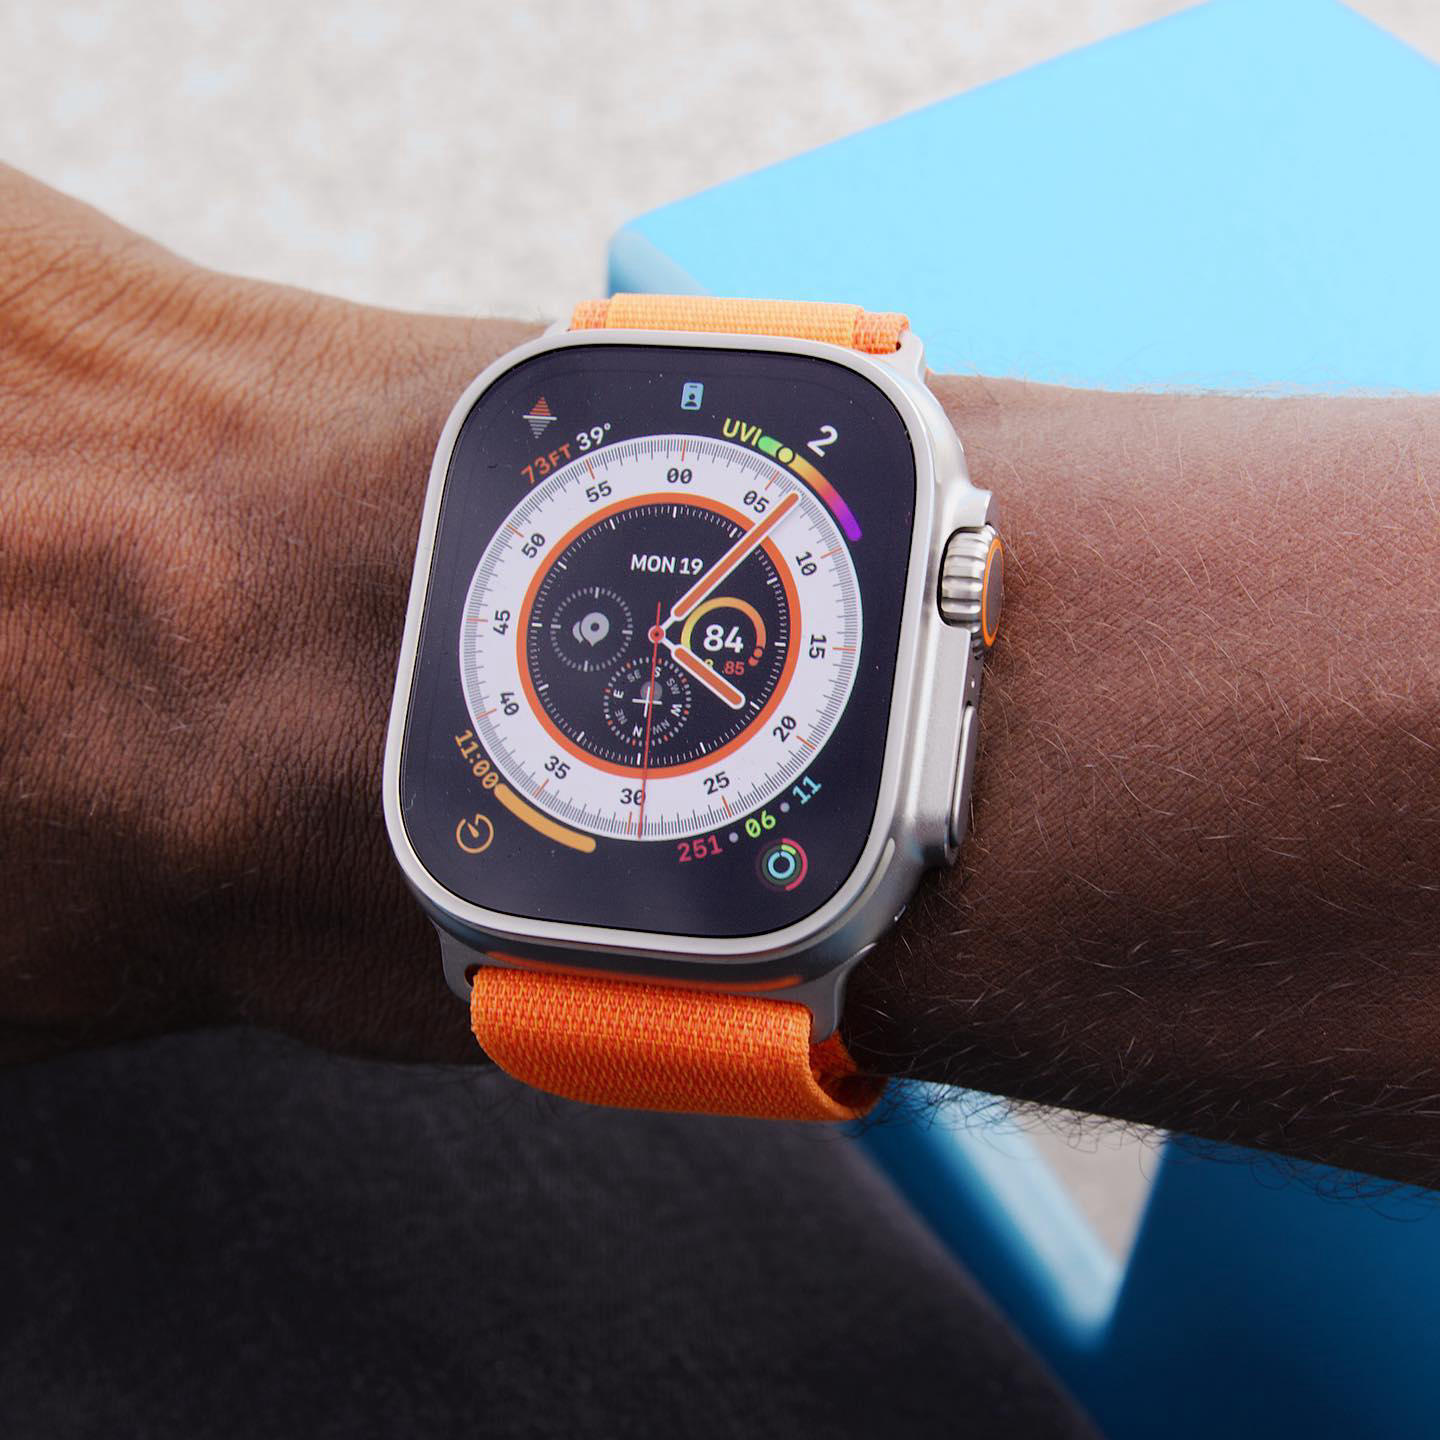 Marques Brownlee - My review of the Apple Watch Ultra is now live - it really reminds me of the ROG